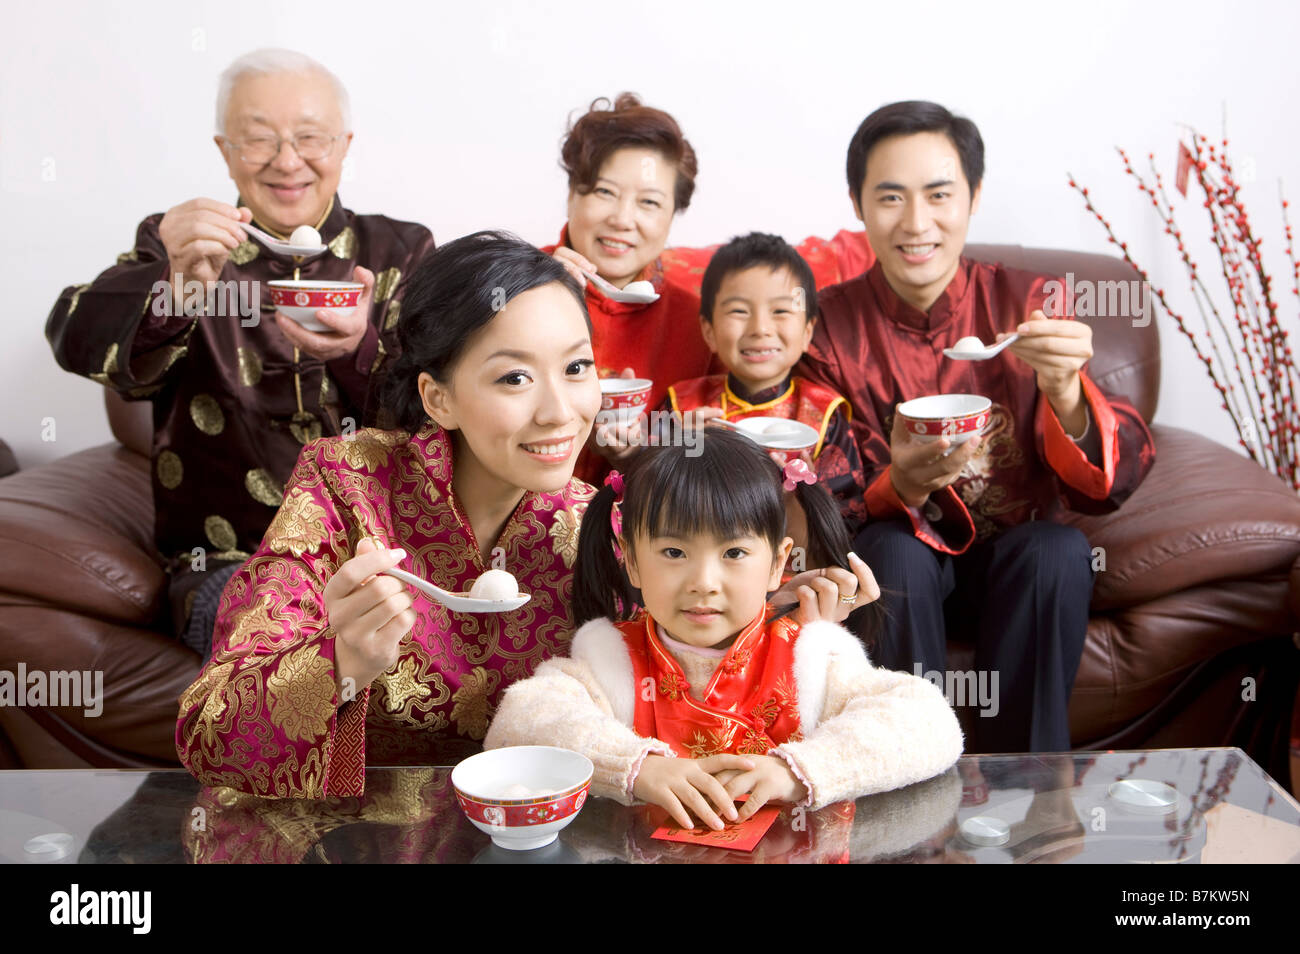 The whole family member in traditional clothing eating stuffed dumpling and smiling at the camera together Stock Photo